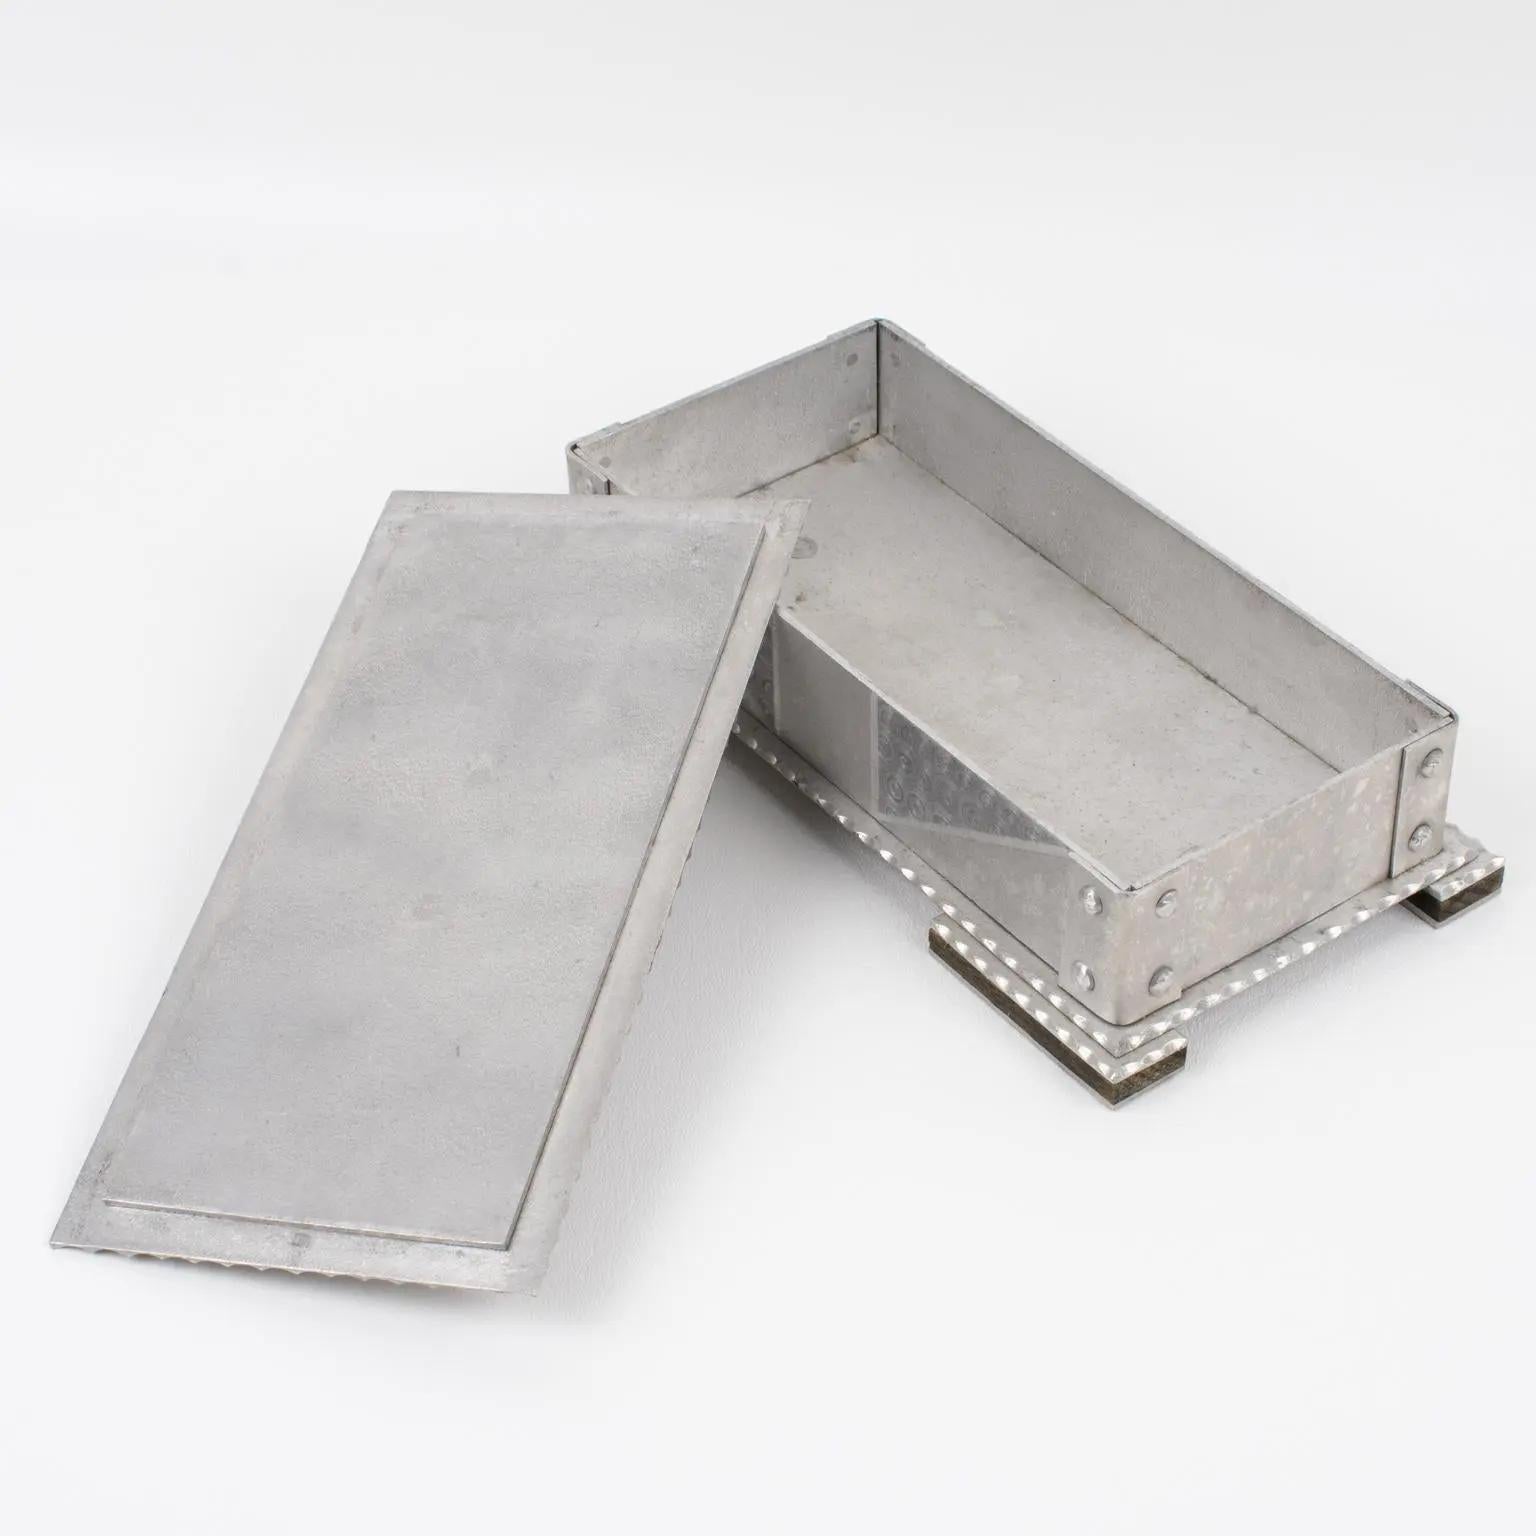 20th Century Bauhaus Arts and Crafts Industrial Textured Aluminum Box, 1920s For Sale